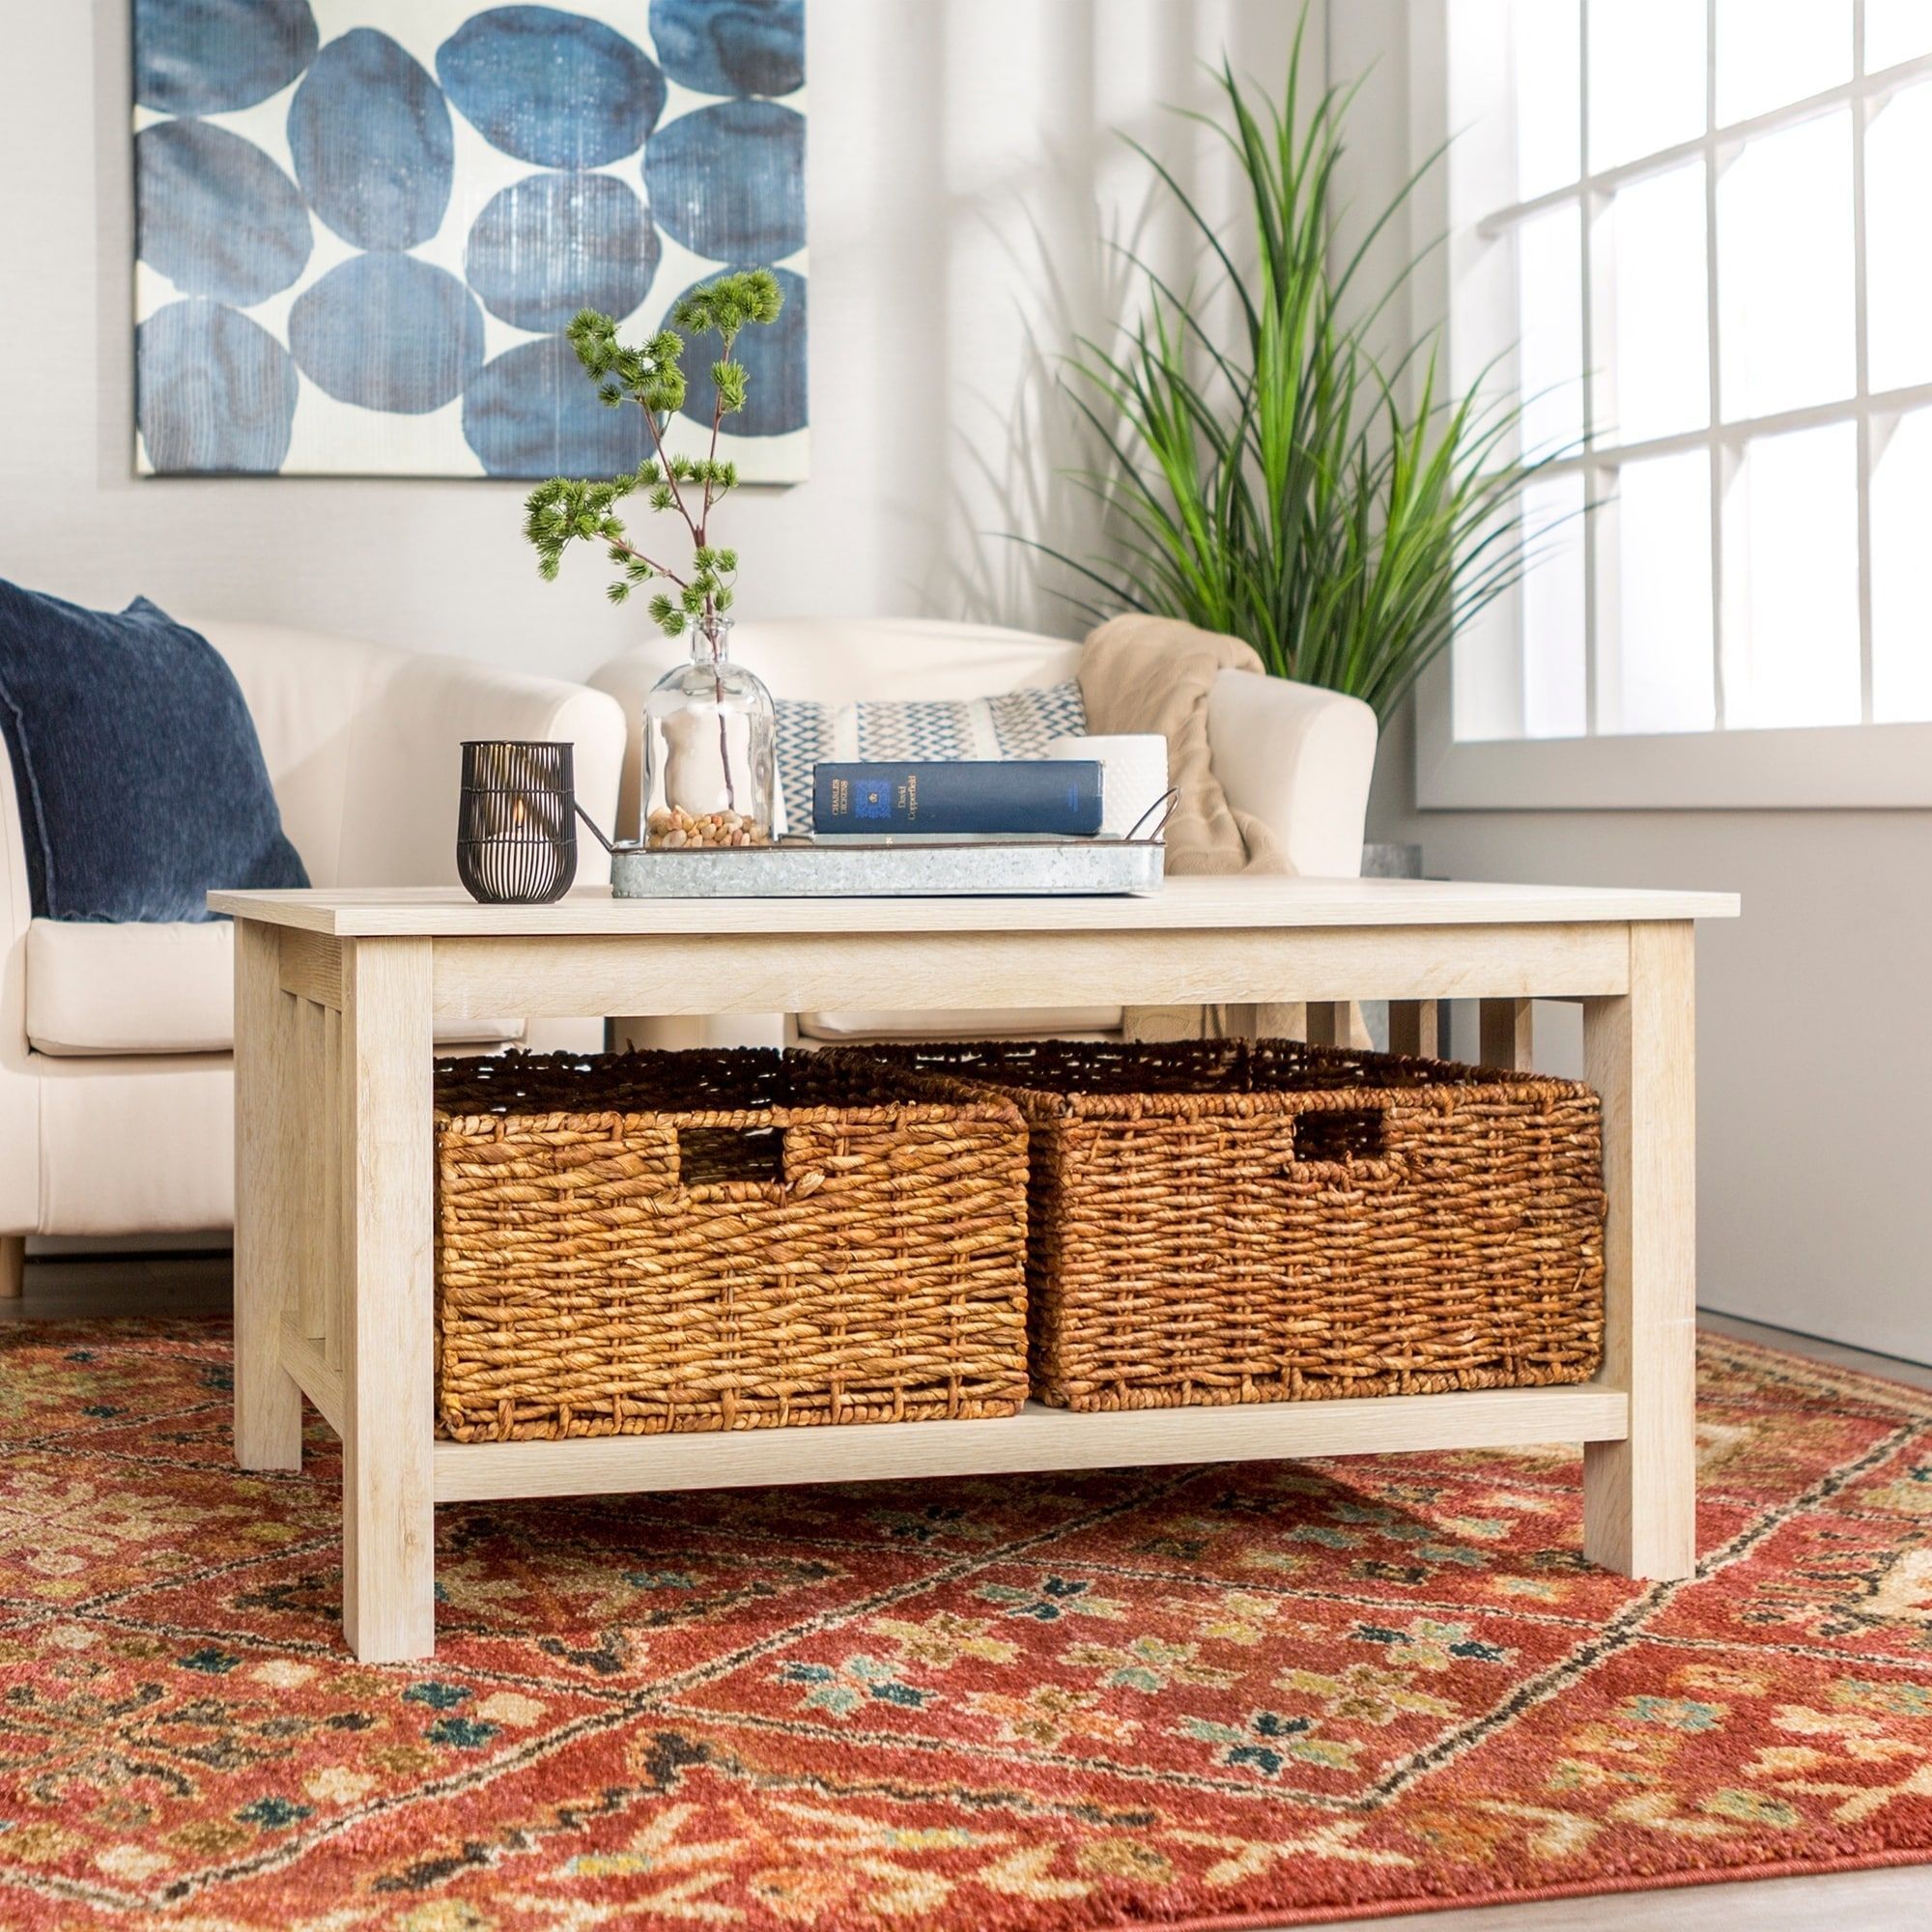 White Coffee Table With Storage Baskets / Diy Rustic Coffee Table With Within Coffee Tables With Open Storage Shelves (View 13 of 20)